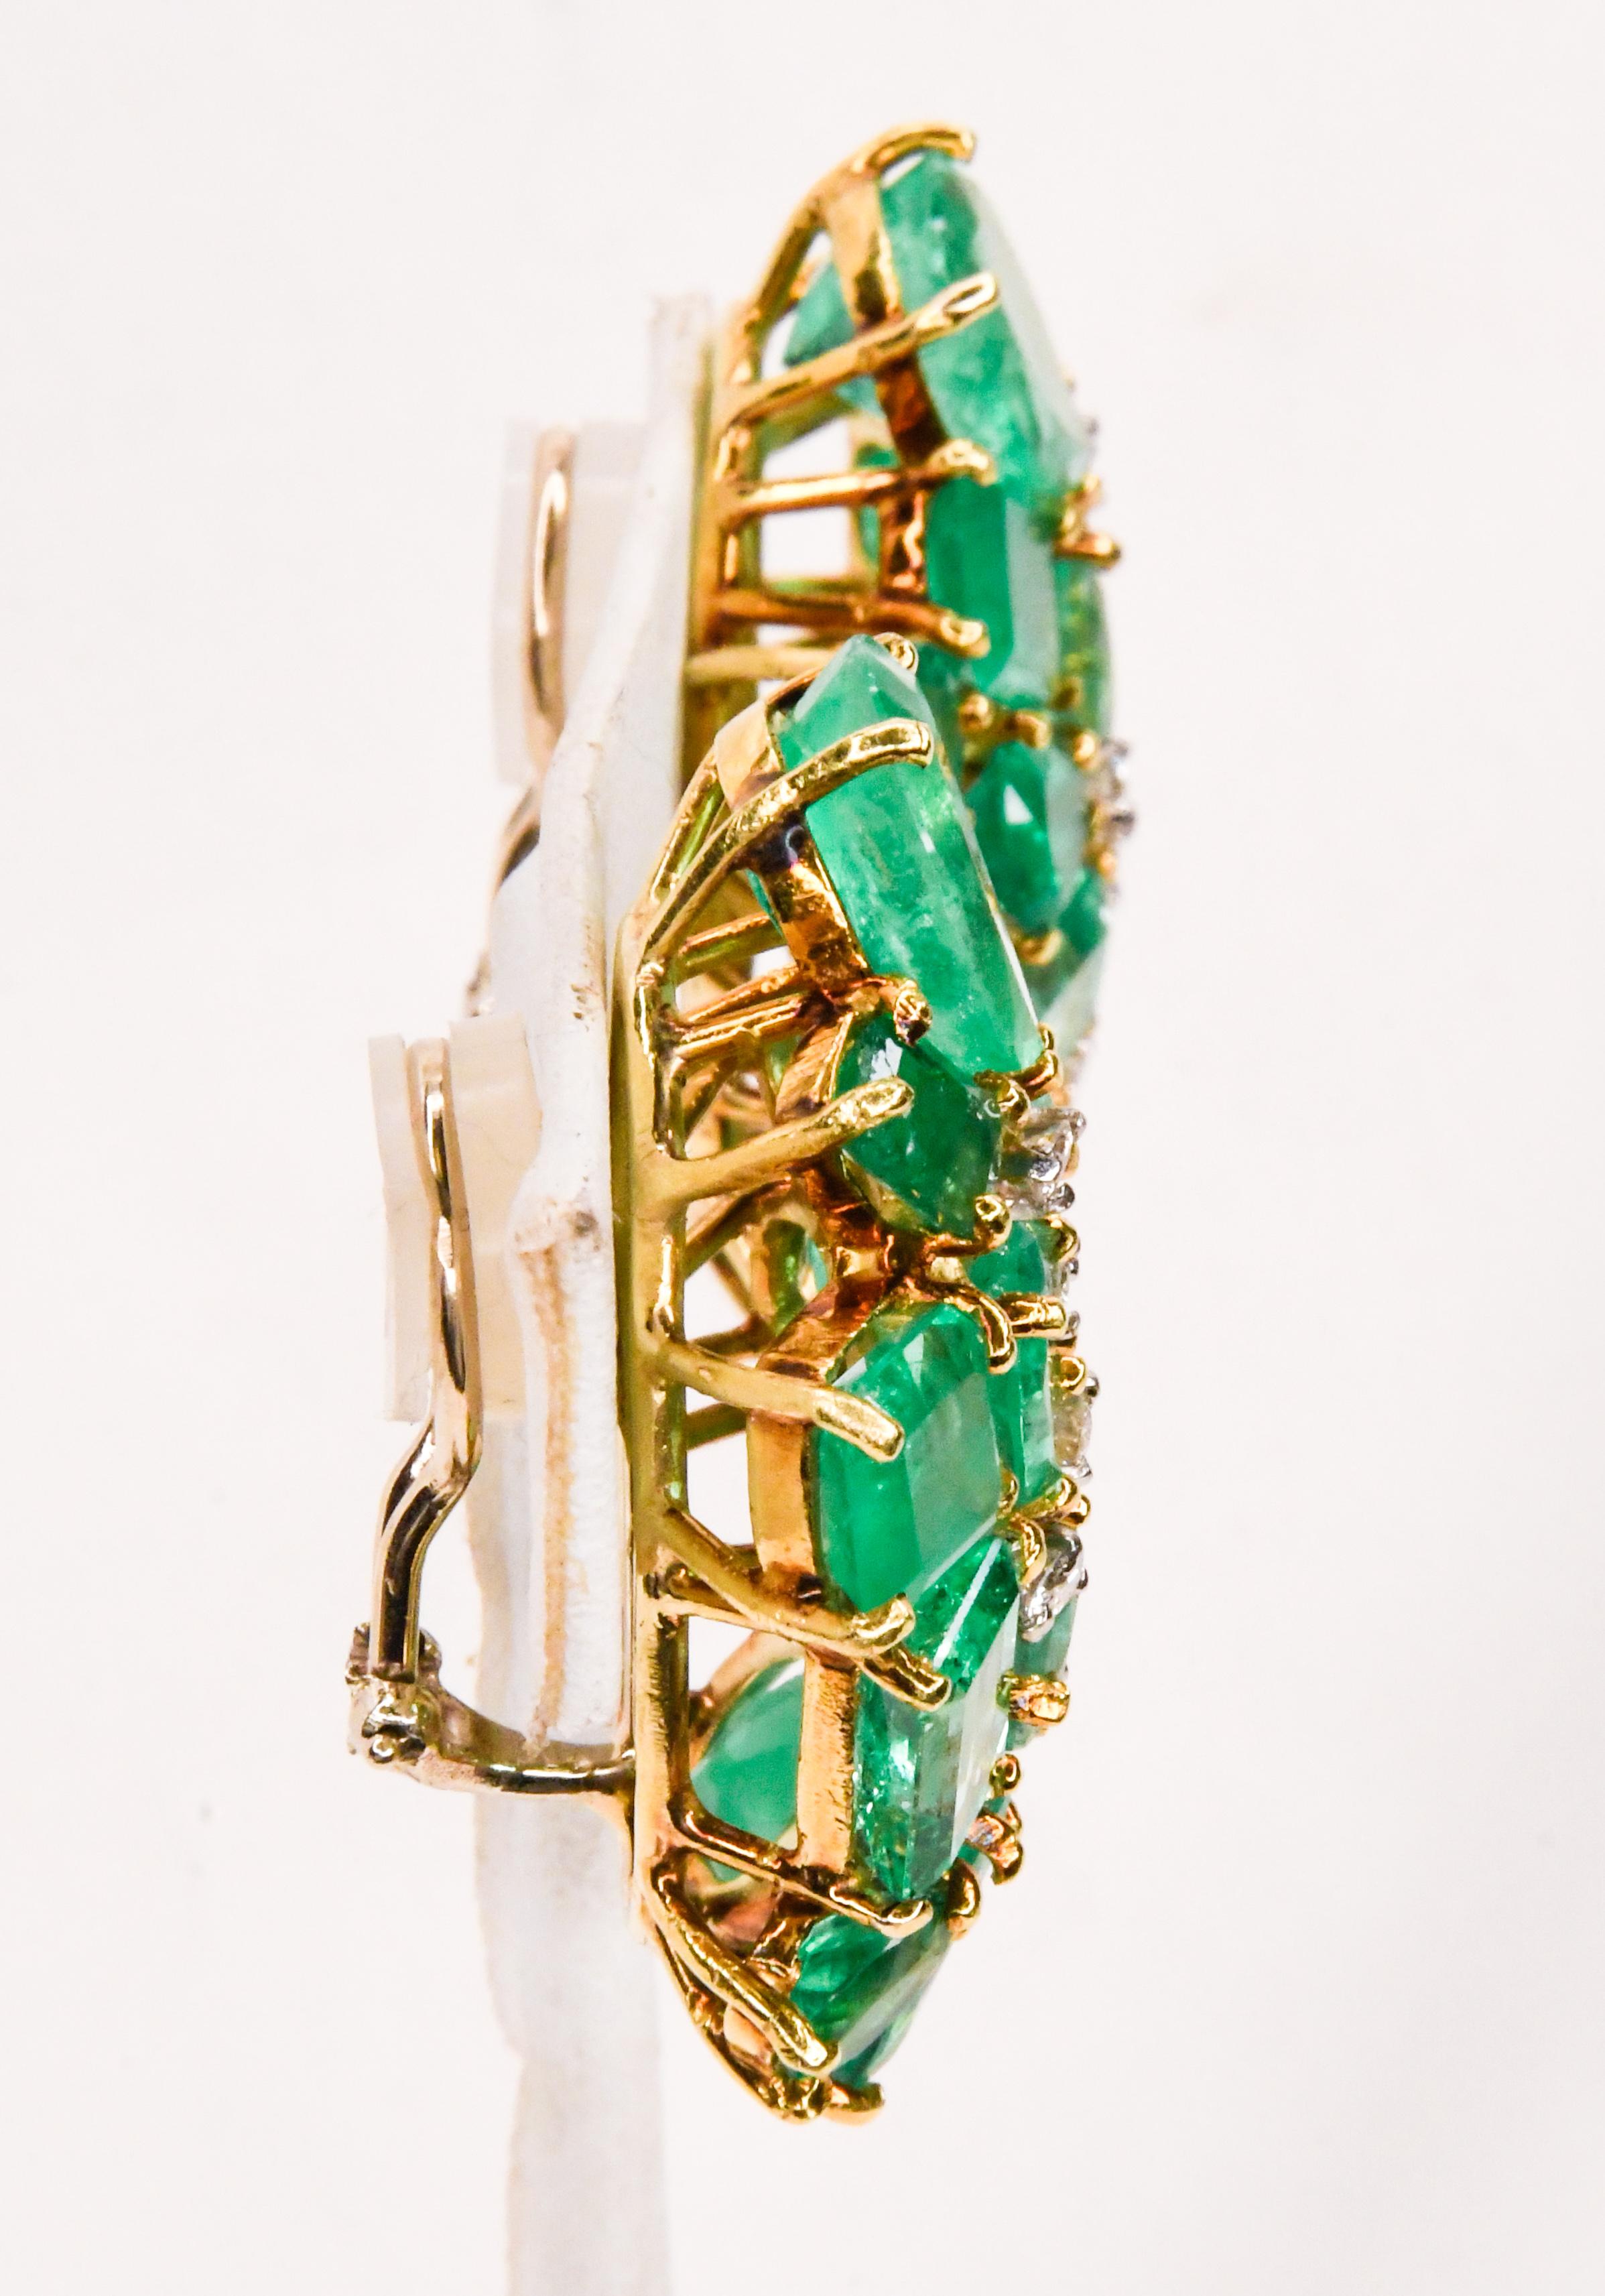 Celebrated Palm Beach designer, Julia Boss, creates timeless original one of a kind designs in 18K or 24K. Her client list is a who's who and her collections are featured in Neiman Marcus and boutiques world wide.  These emerald and diamond earrings